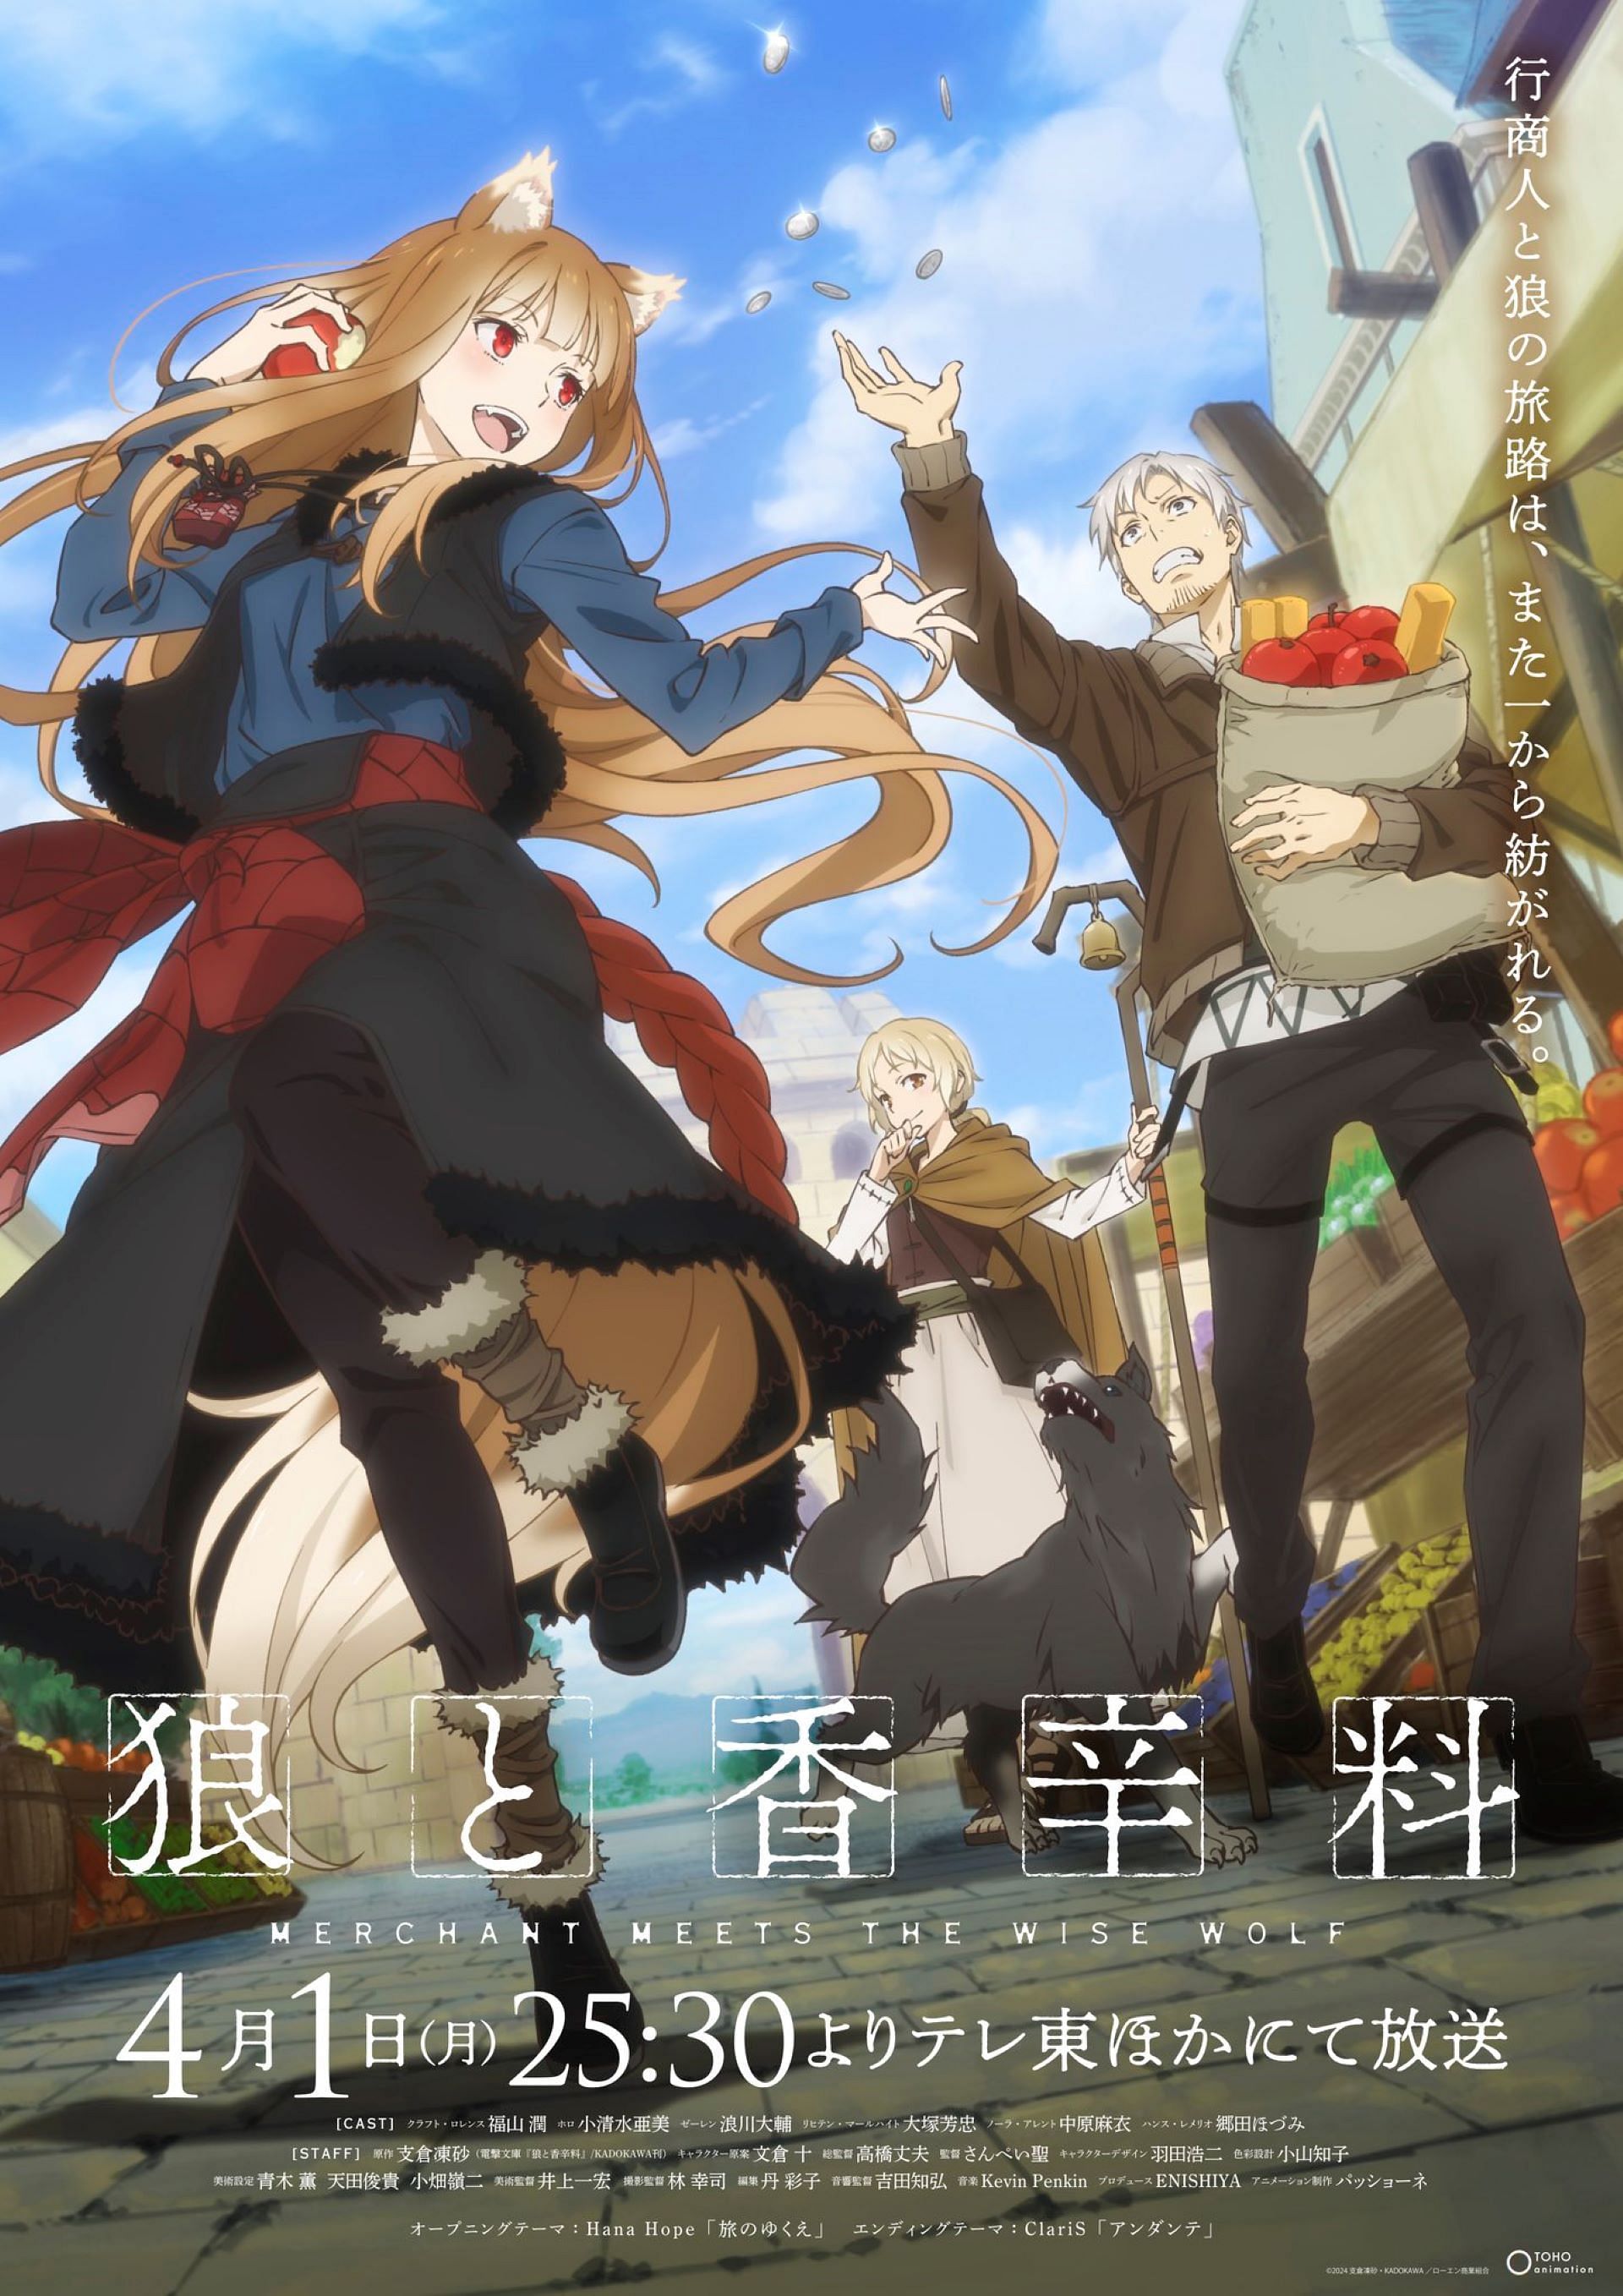 The latest visual for the new Spice and Wolf anime (Image via Studio Passione)